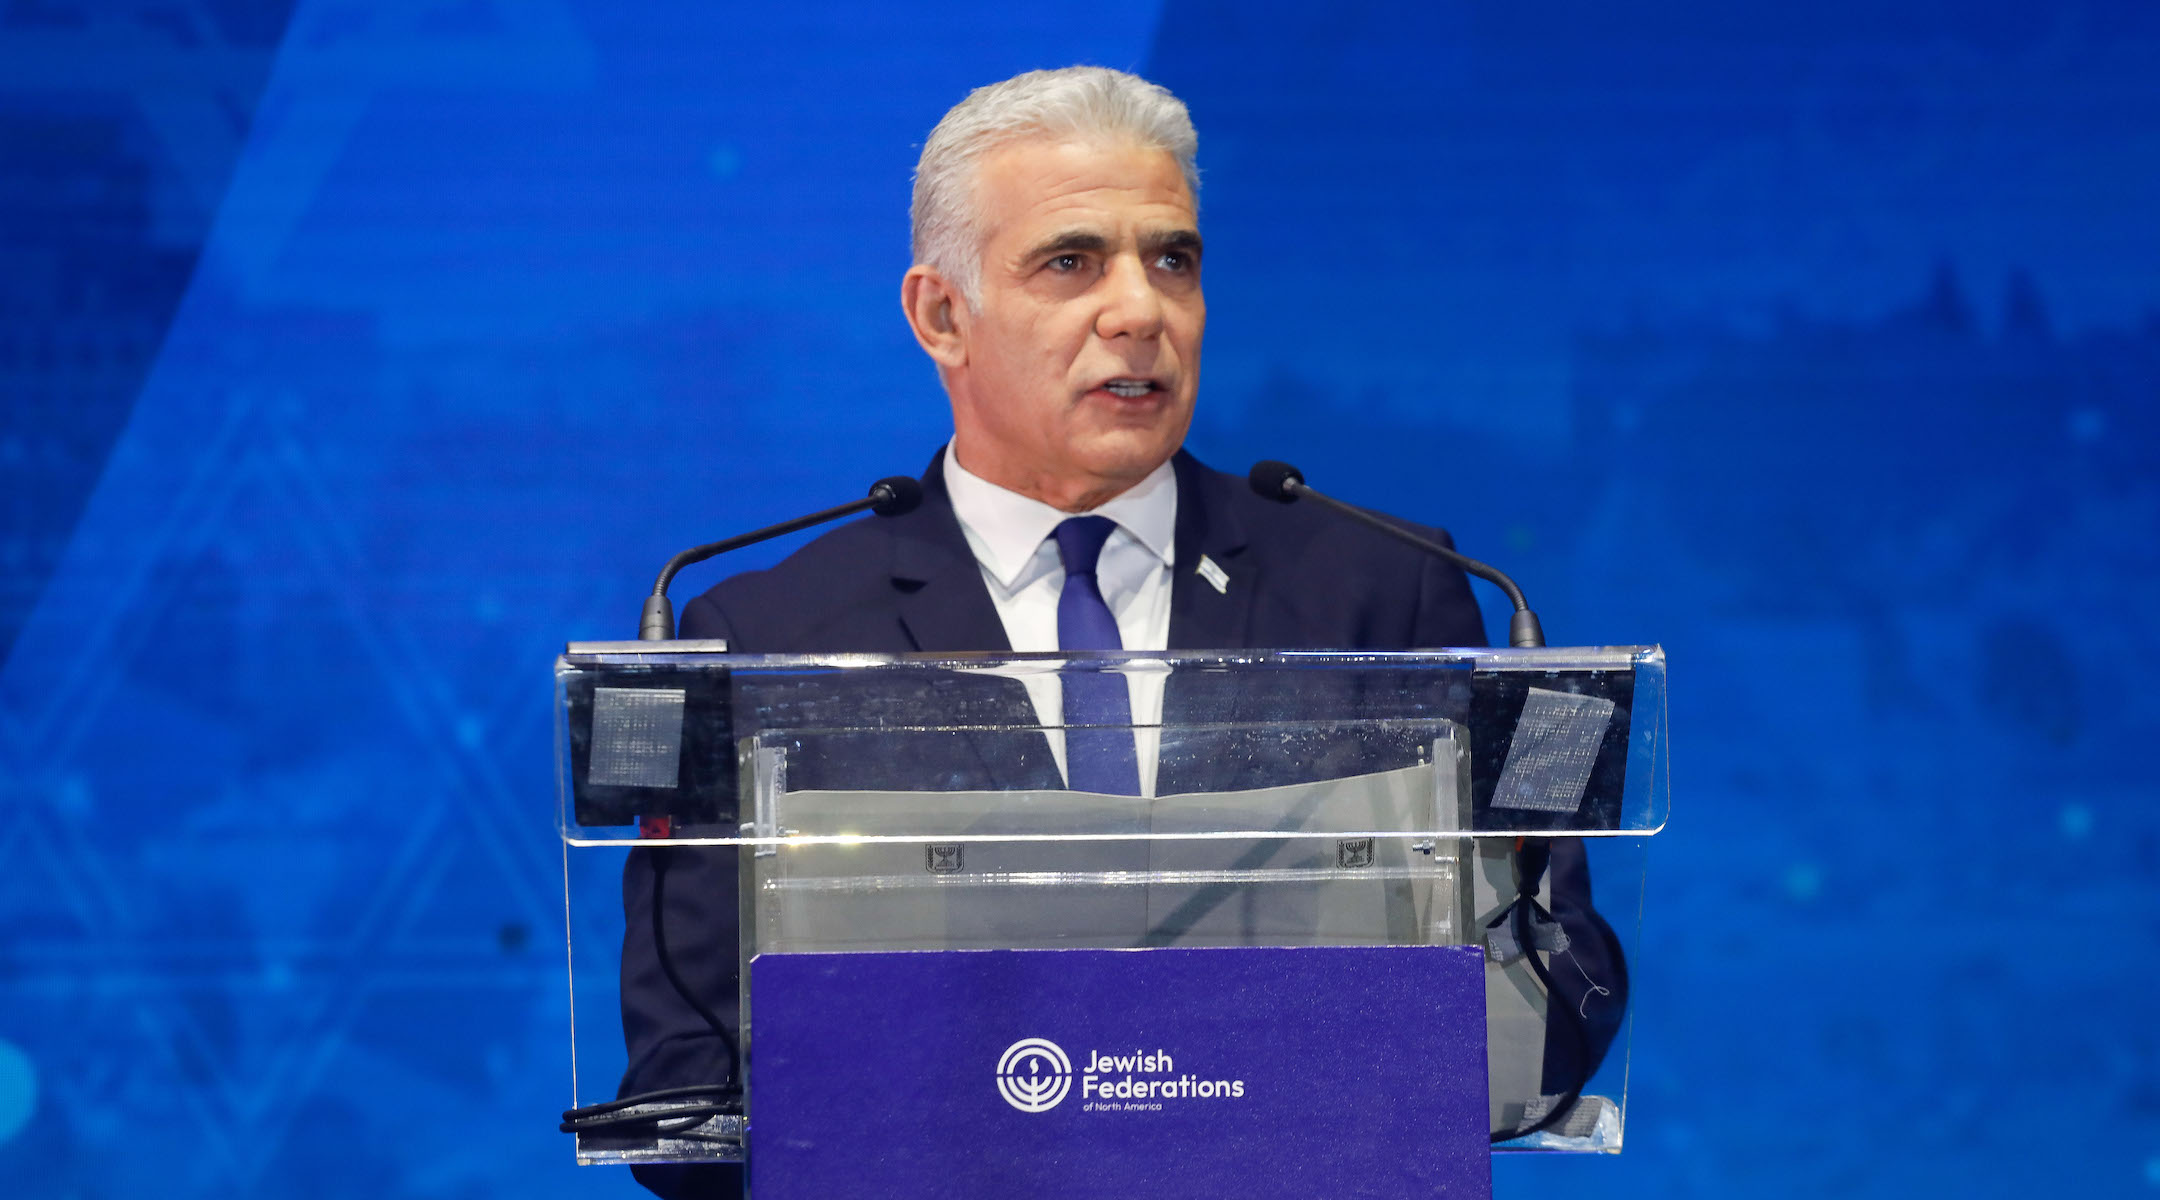 Former Israeli Prime Minister Yair Lapid speaks at the Jewish Federations of North America General Assembly in Tel Aviv on April 24, 2023. (Courtesy of JFNA/Amnon Gutman)